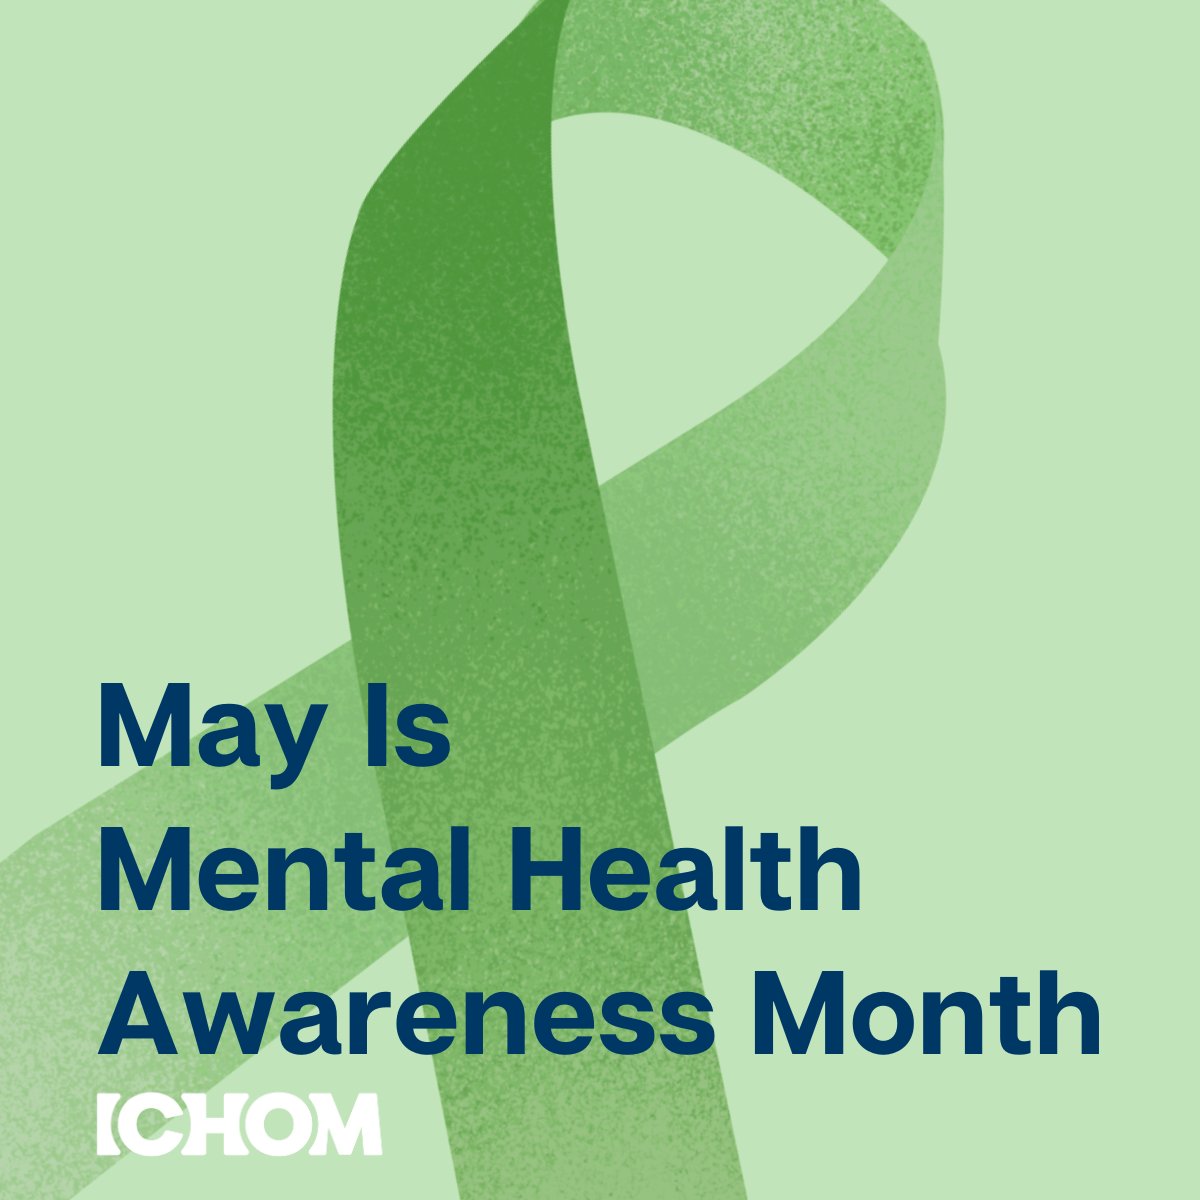 May is #MentalHealthAwarenessMonth 💚 Over the course of the month, we'll be shining a light on the ICHOM Sets tailored to mental health, developed by patients, leading clinicians, and researchers to develop outcomes that matter most to patients: bit.ly/3Wq55FH